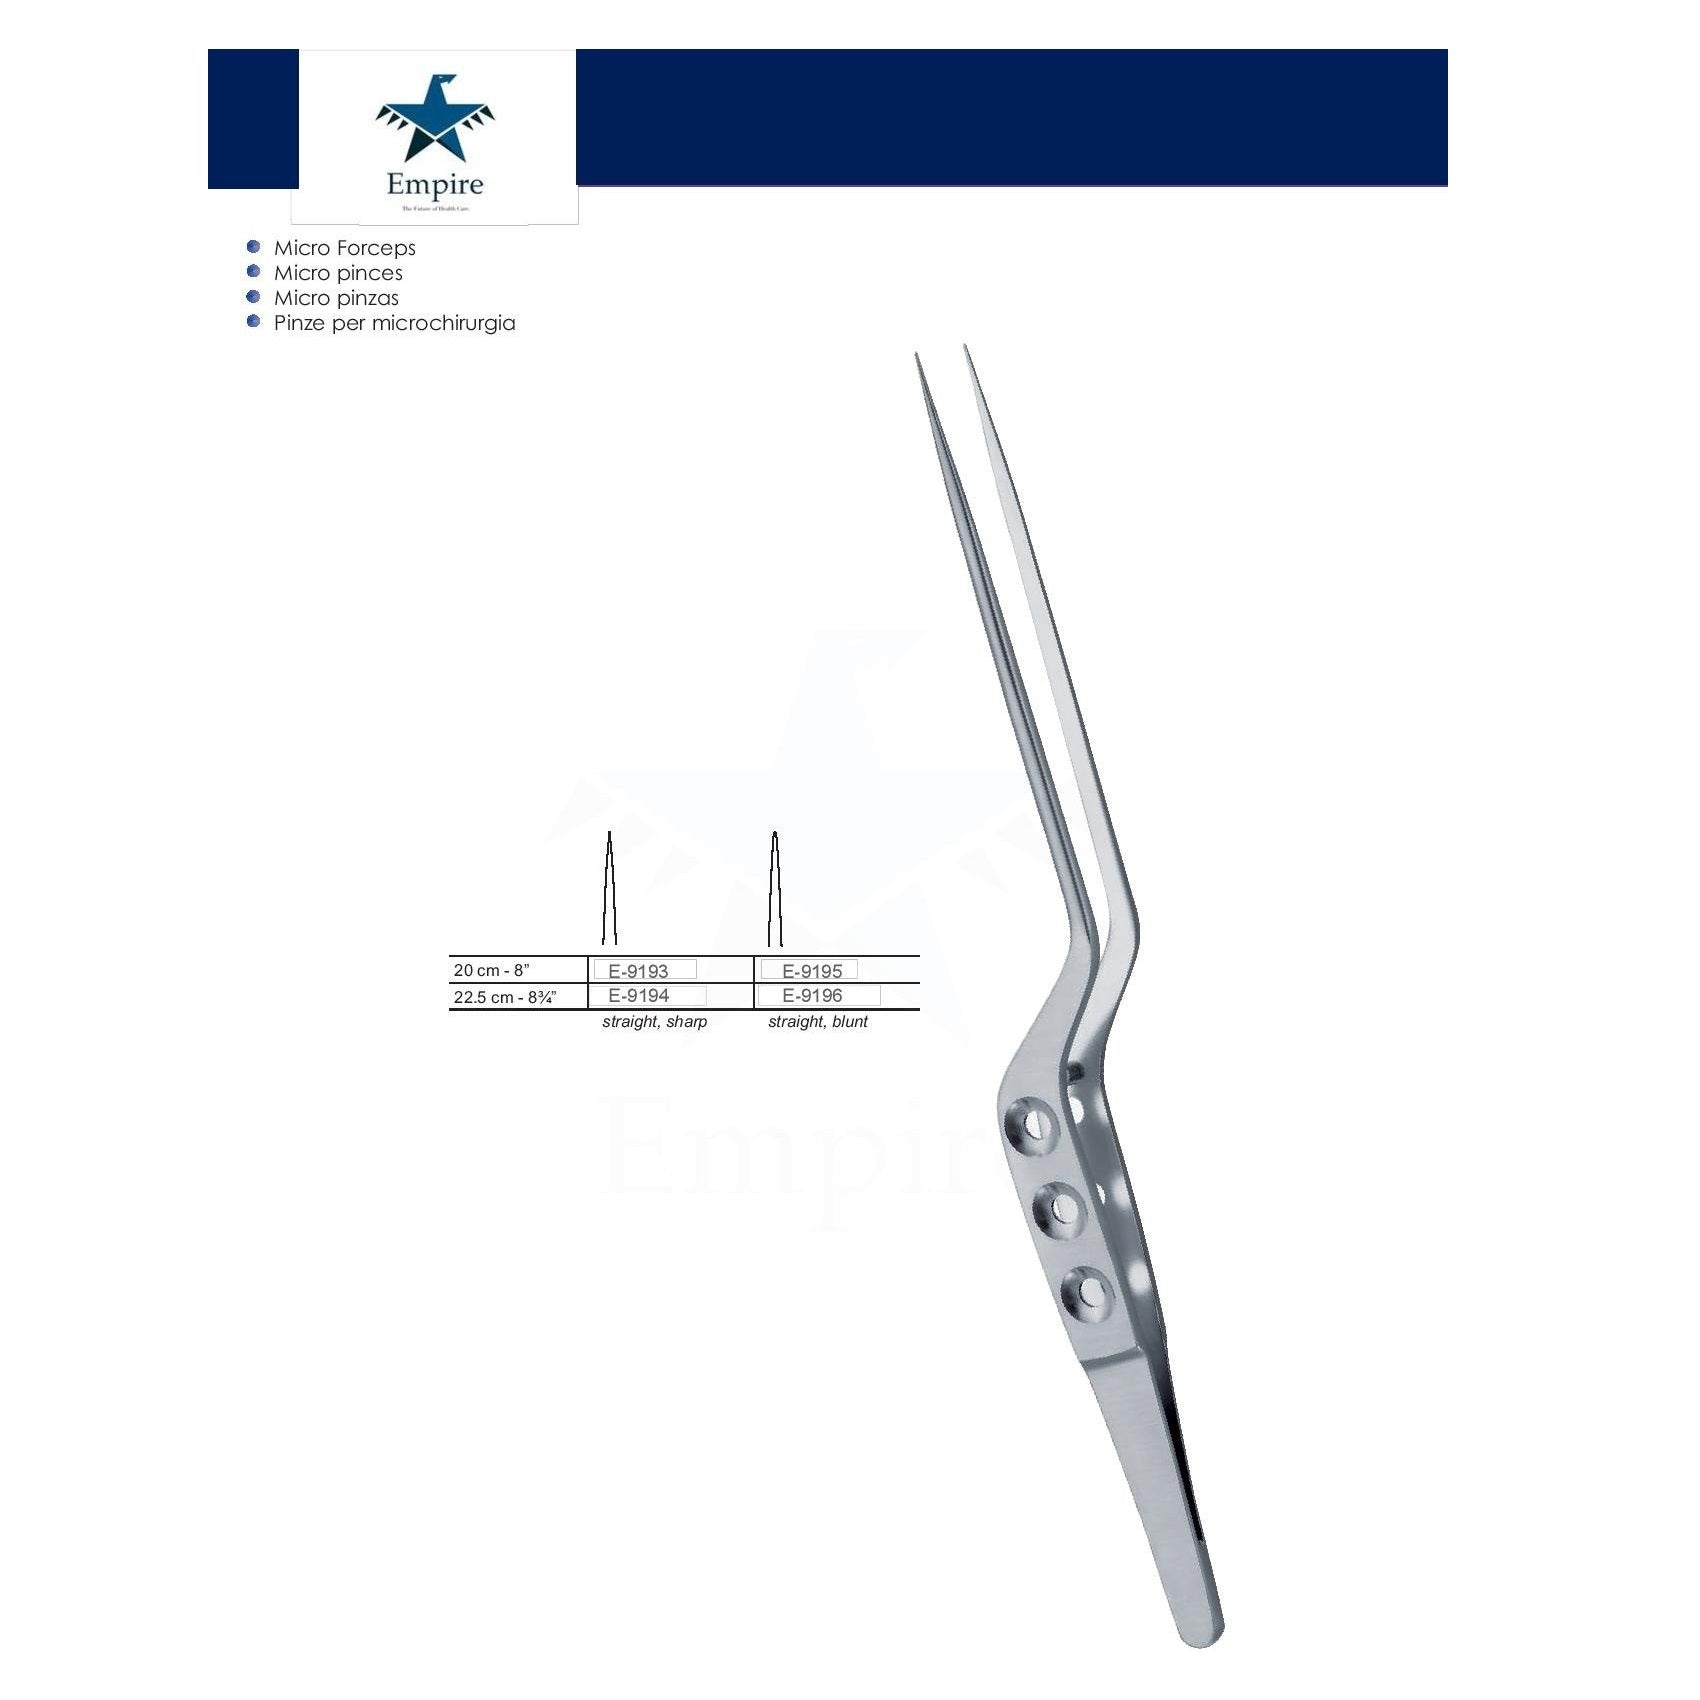 Empire's German Stainless Micro-Surgery Dissecting Forceps (Re-Useable) various sizes - EmpireMedical 